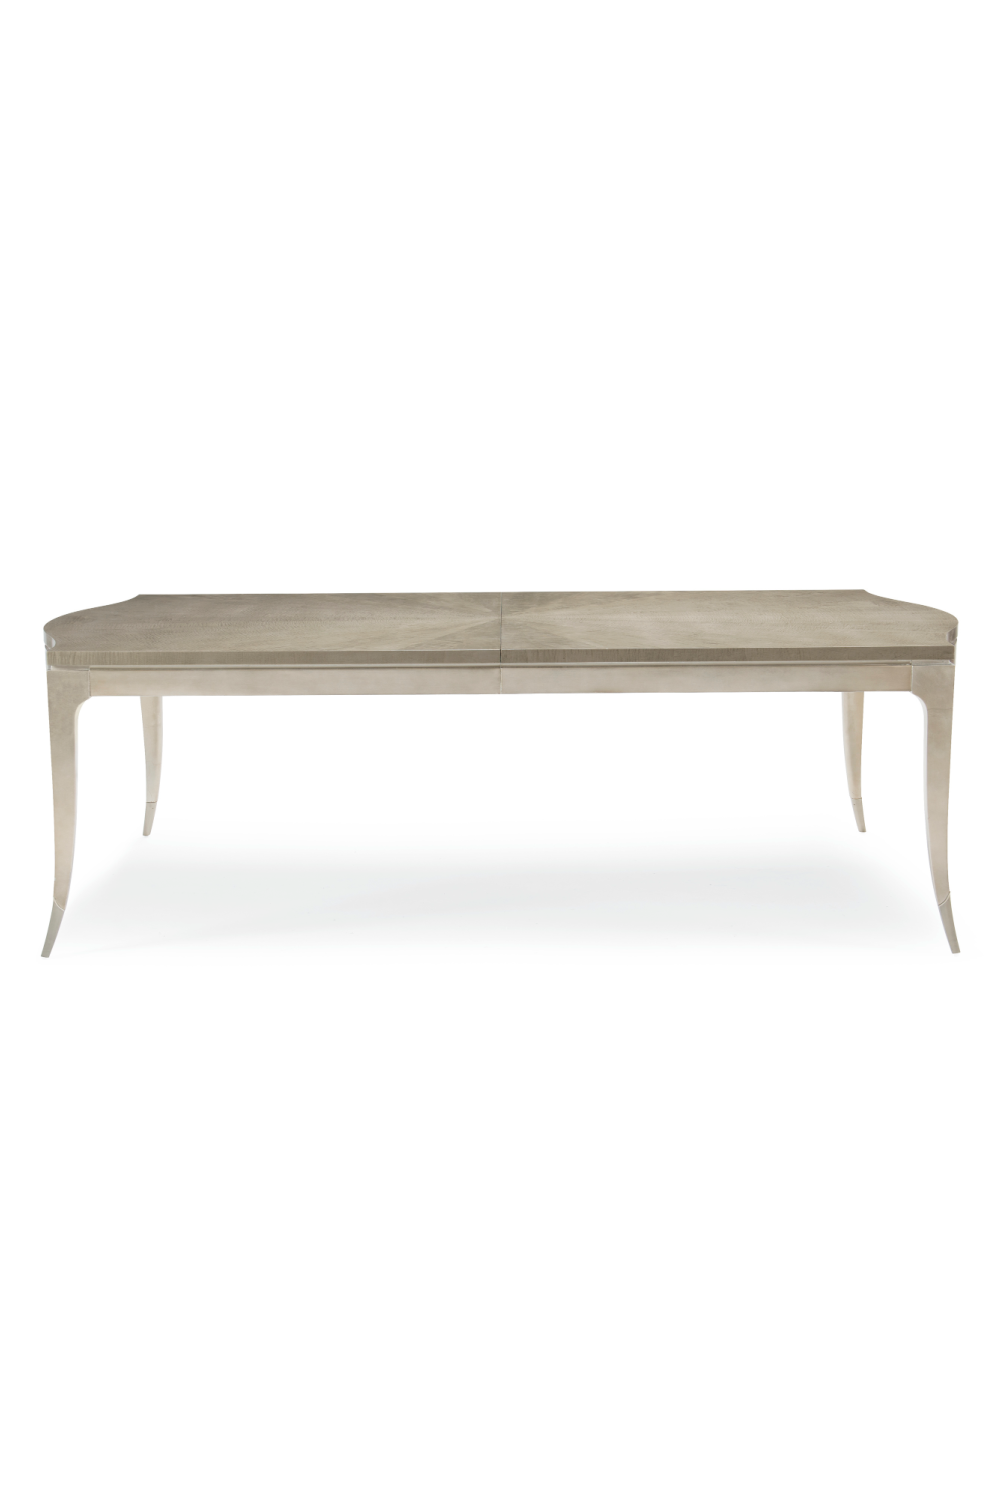 Curly Maple Dining Table | Caracole On A Silver Platter | Oroa.com